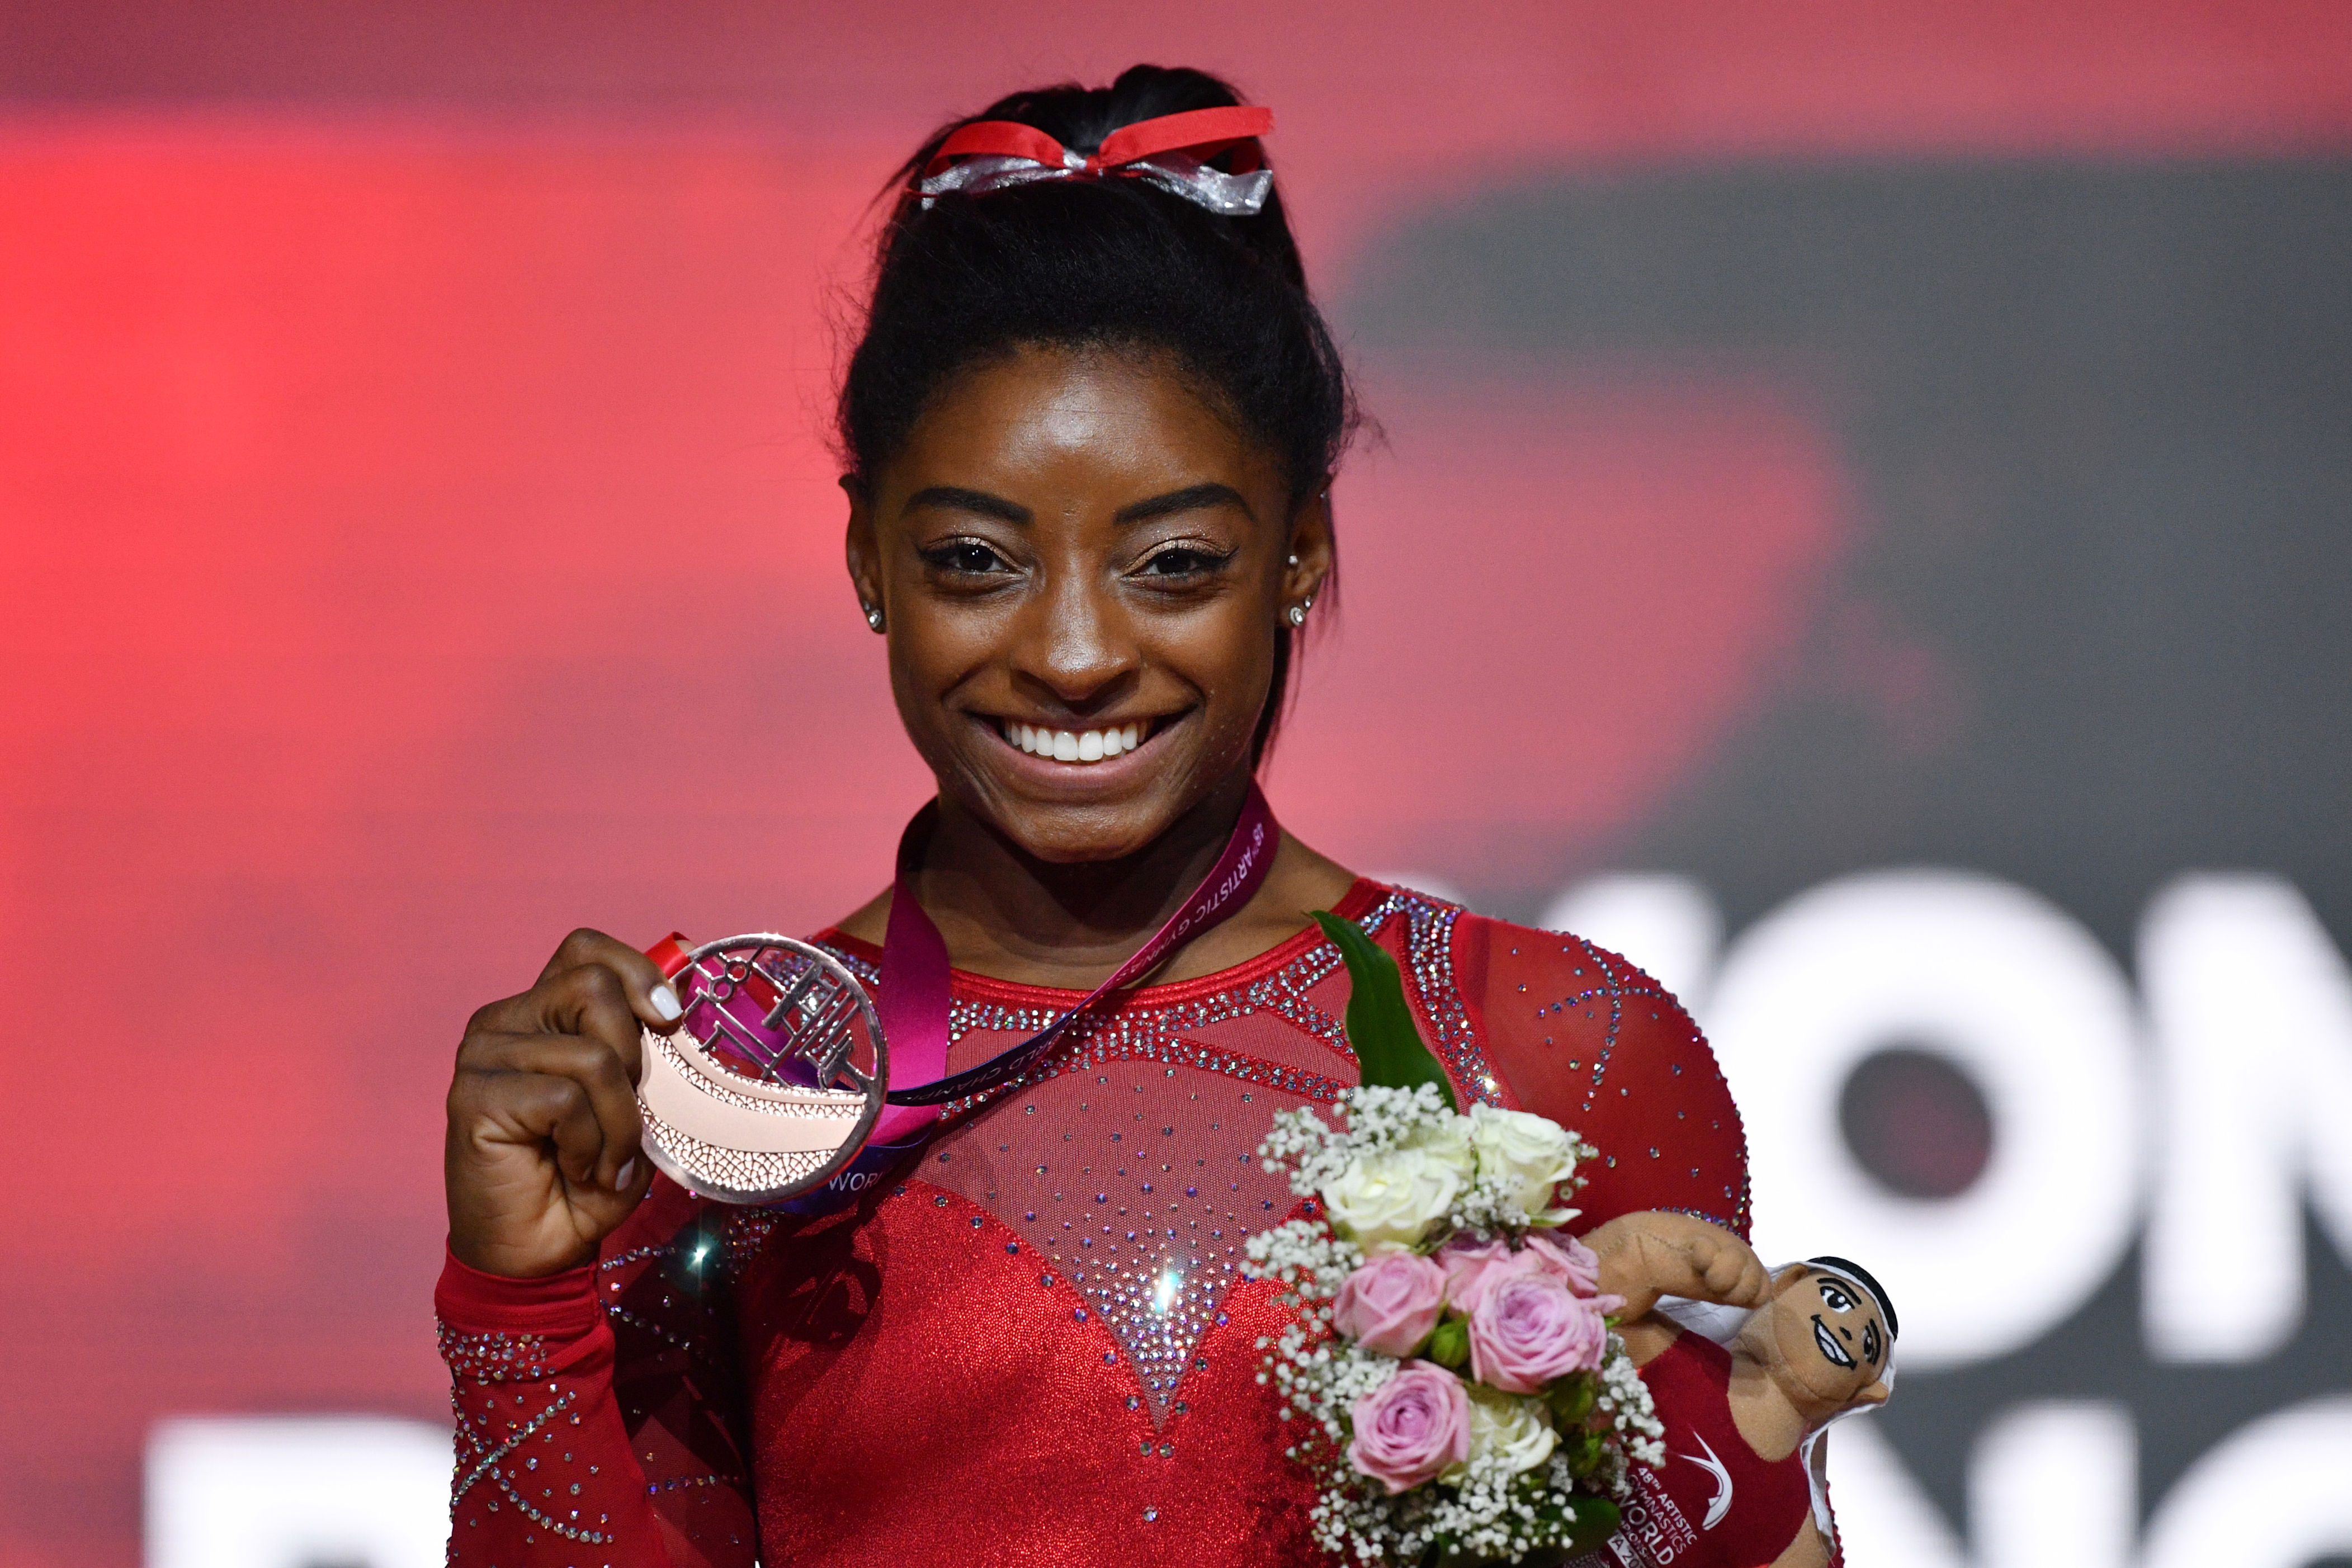 <p>Simone Biles made history as both a woman and a person of color when she took home her fourth gymnastics world championship title in 2018. The Olympic gold medal winner became the first woman to win four all-around world titles after previously winning in 2013, 2014 and 2015. Then in October 2019, she won her 21st medal at the world gymnastics championships, making her the most decorated female gymnast in history.</p><p>MORE: <a href="https://www.wonderwall.com/celebrity/asians-in-hollywood-whove-made-history-473149.gallery">Asian stars who've made history in Hollywood and beyond</a></p>